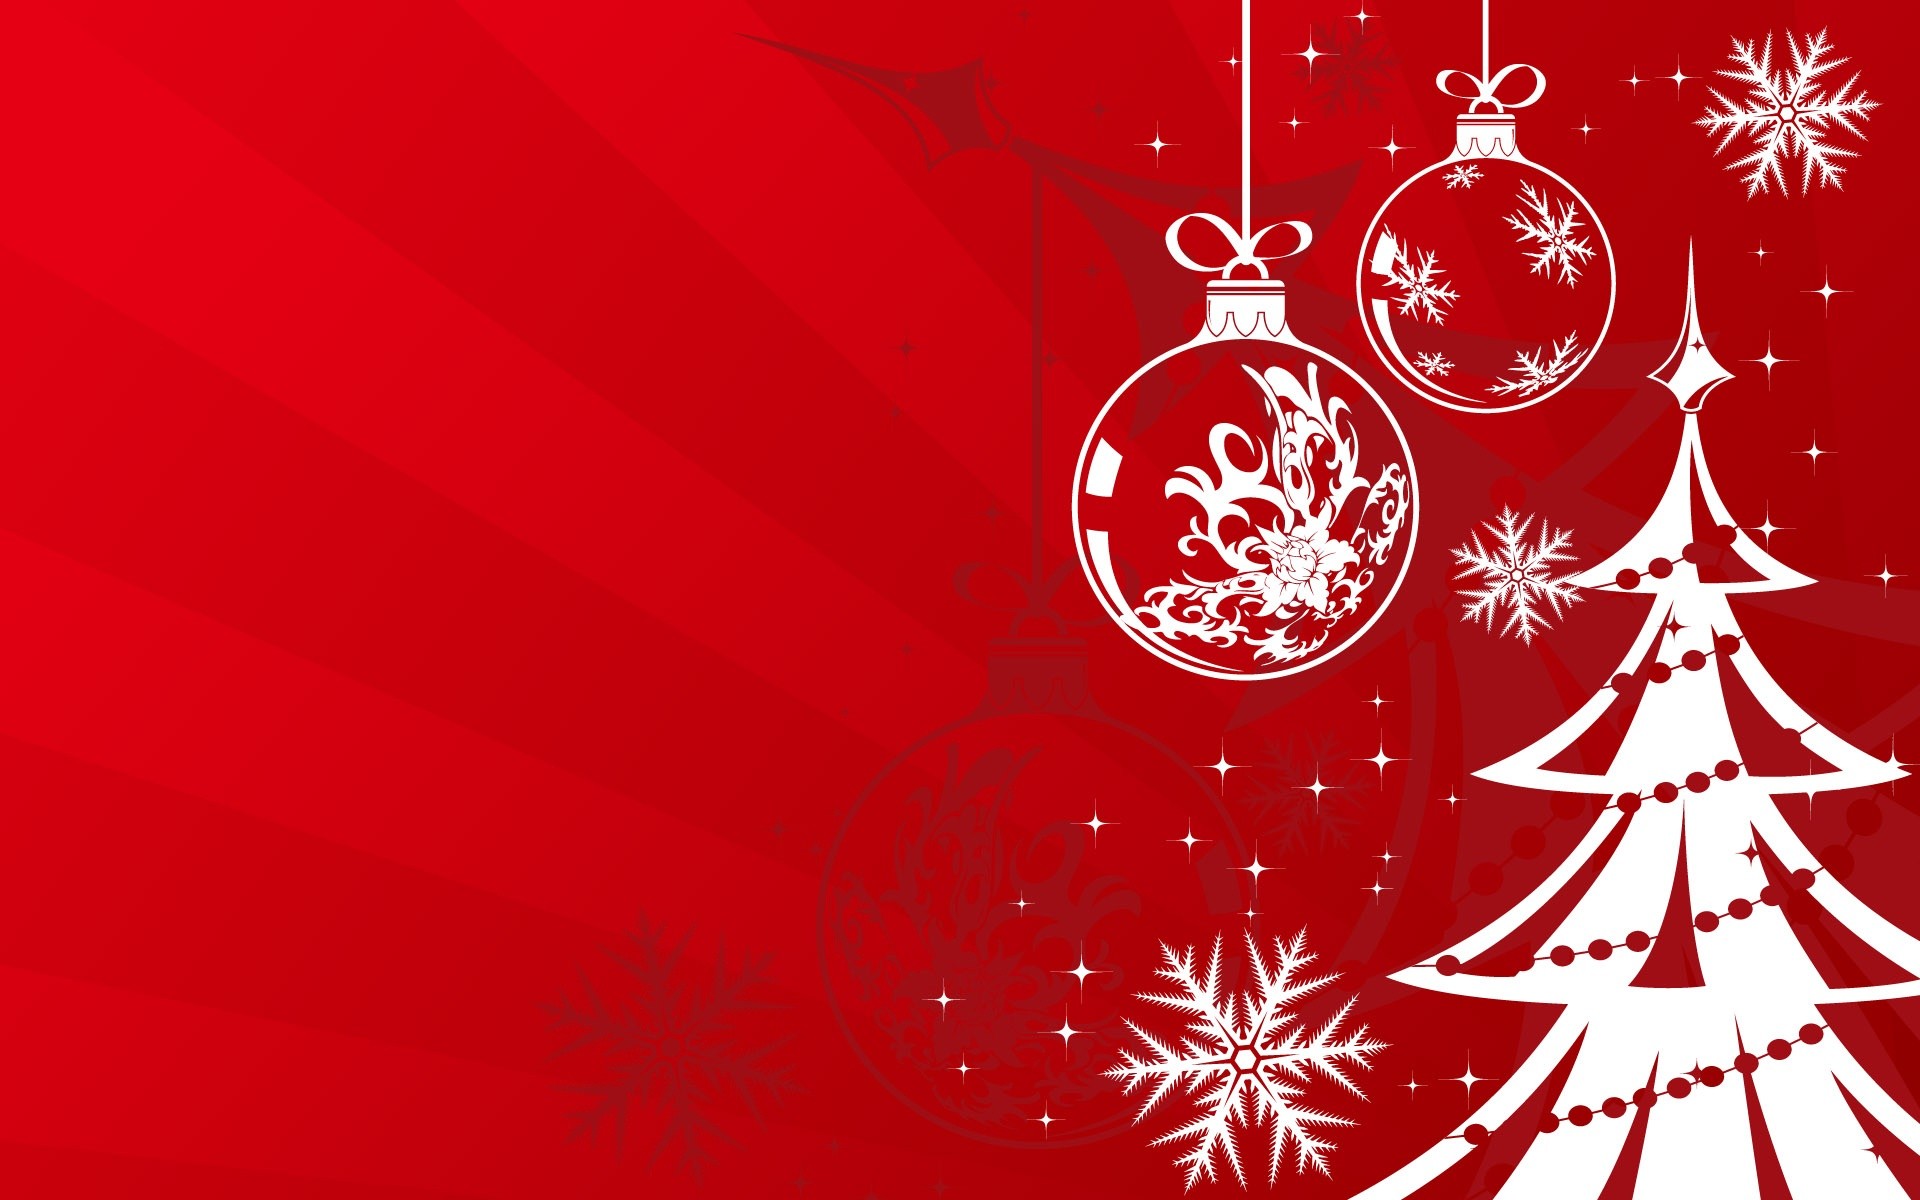 2015 Christmas background pictures - wallpapers, images, photos ...